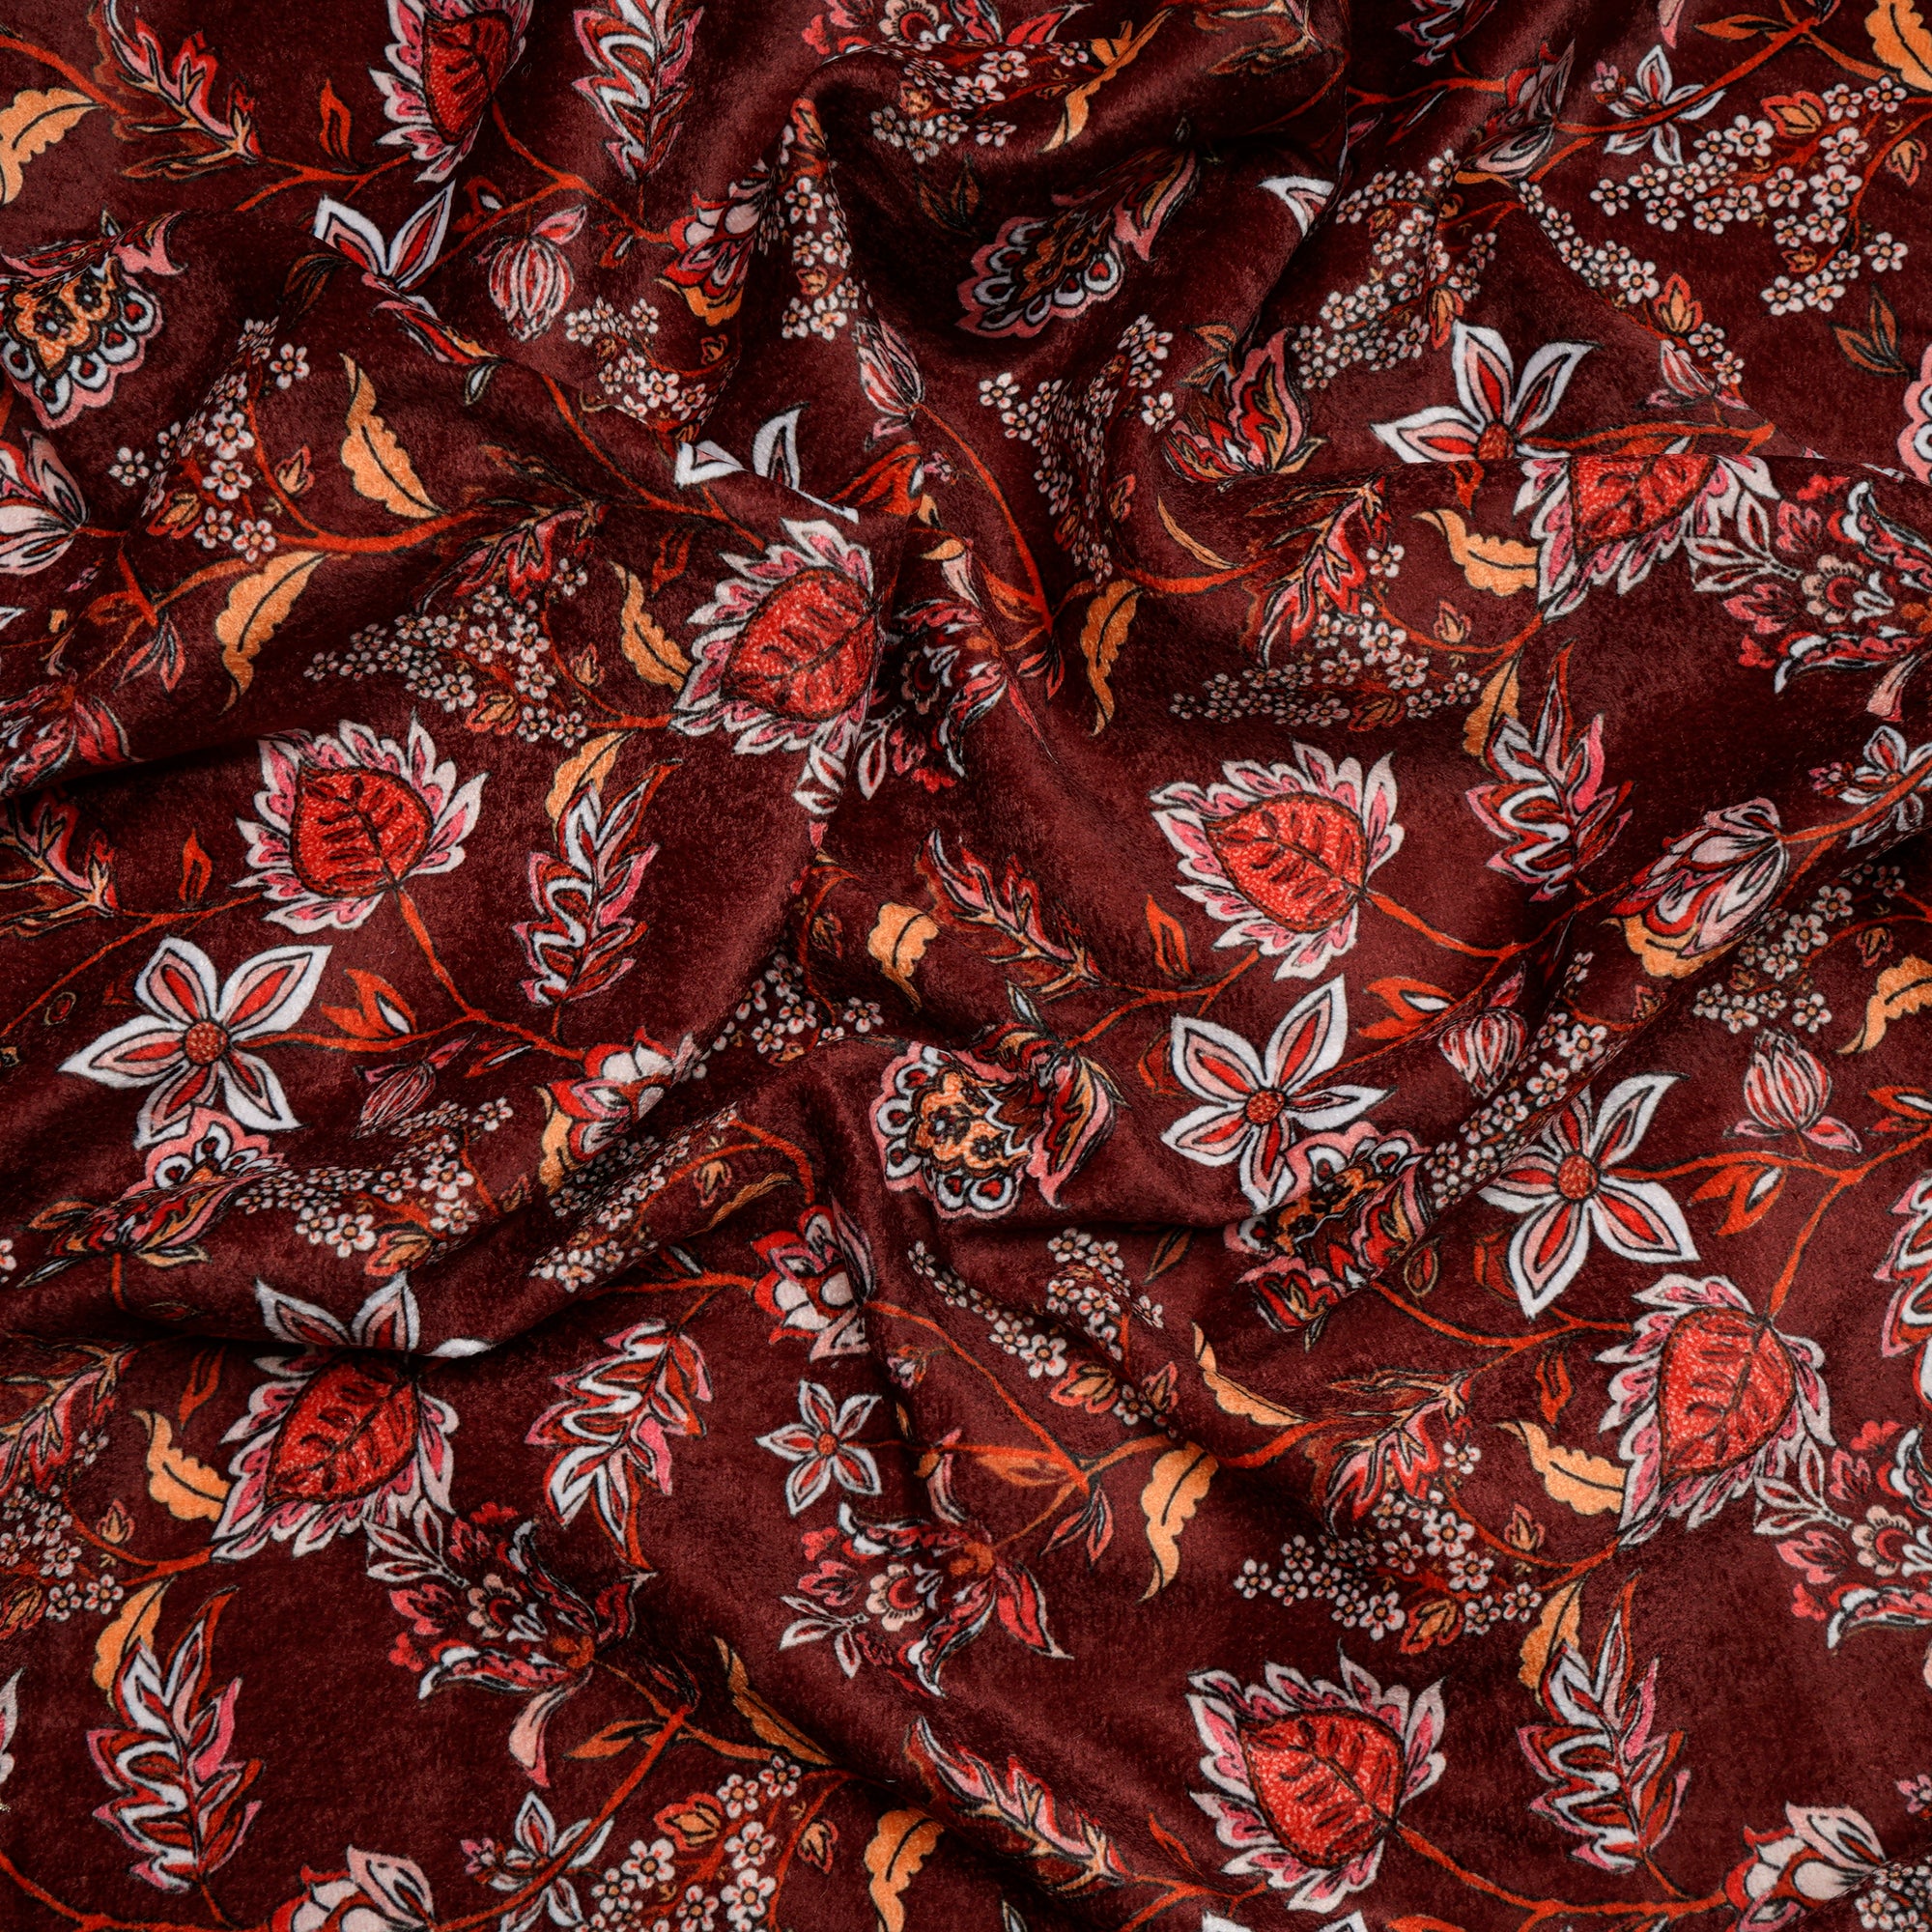 Brandy Snifter Floral Pattern Digital Printed Imported Polyester Velvet Fabric (44" Width)